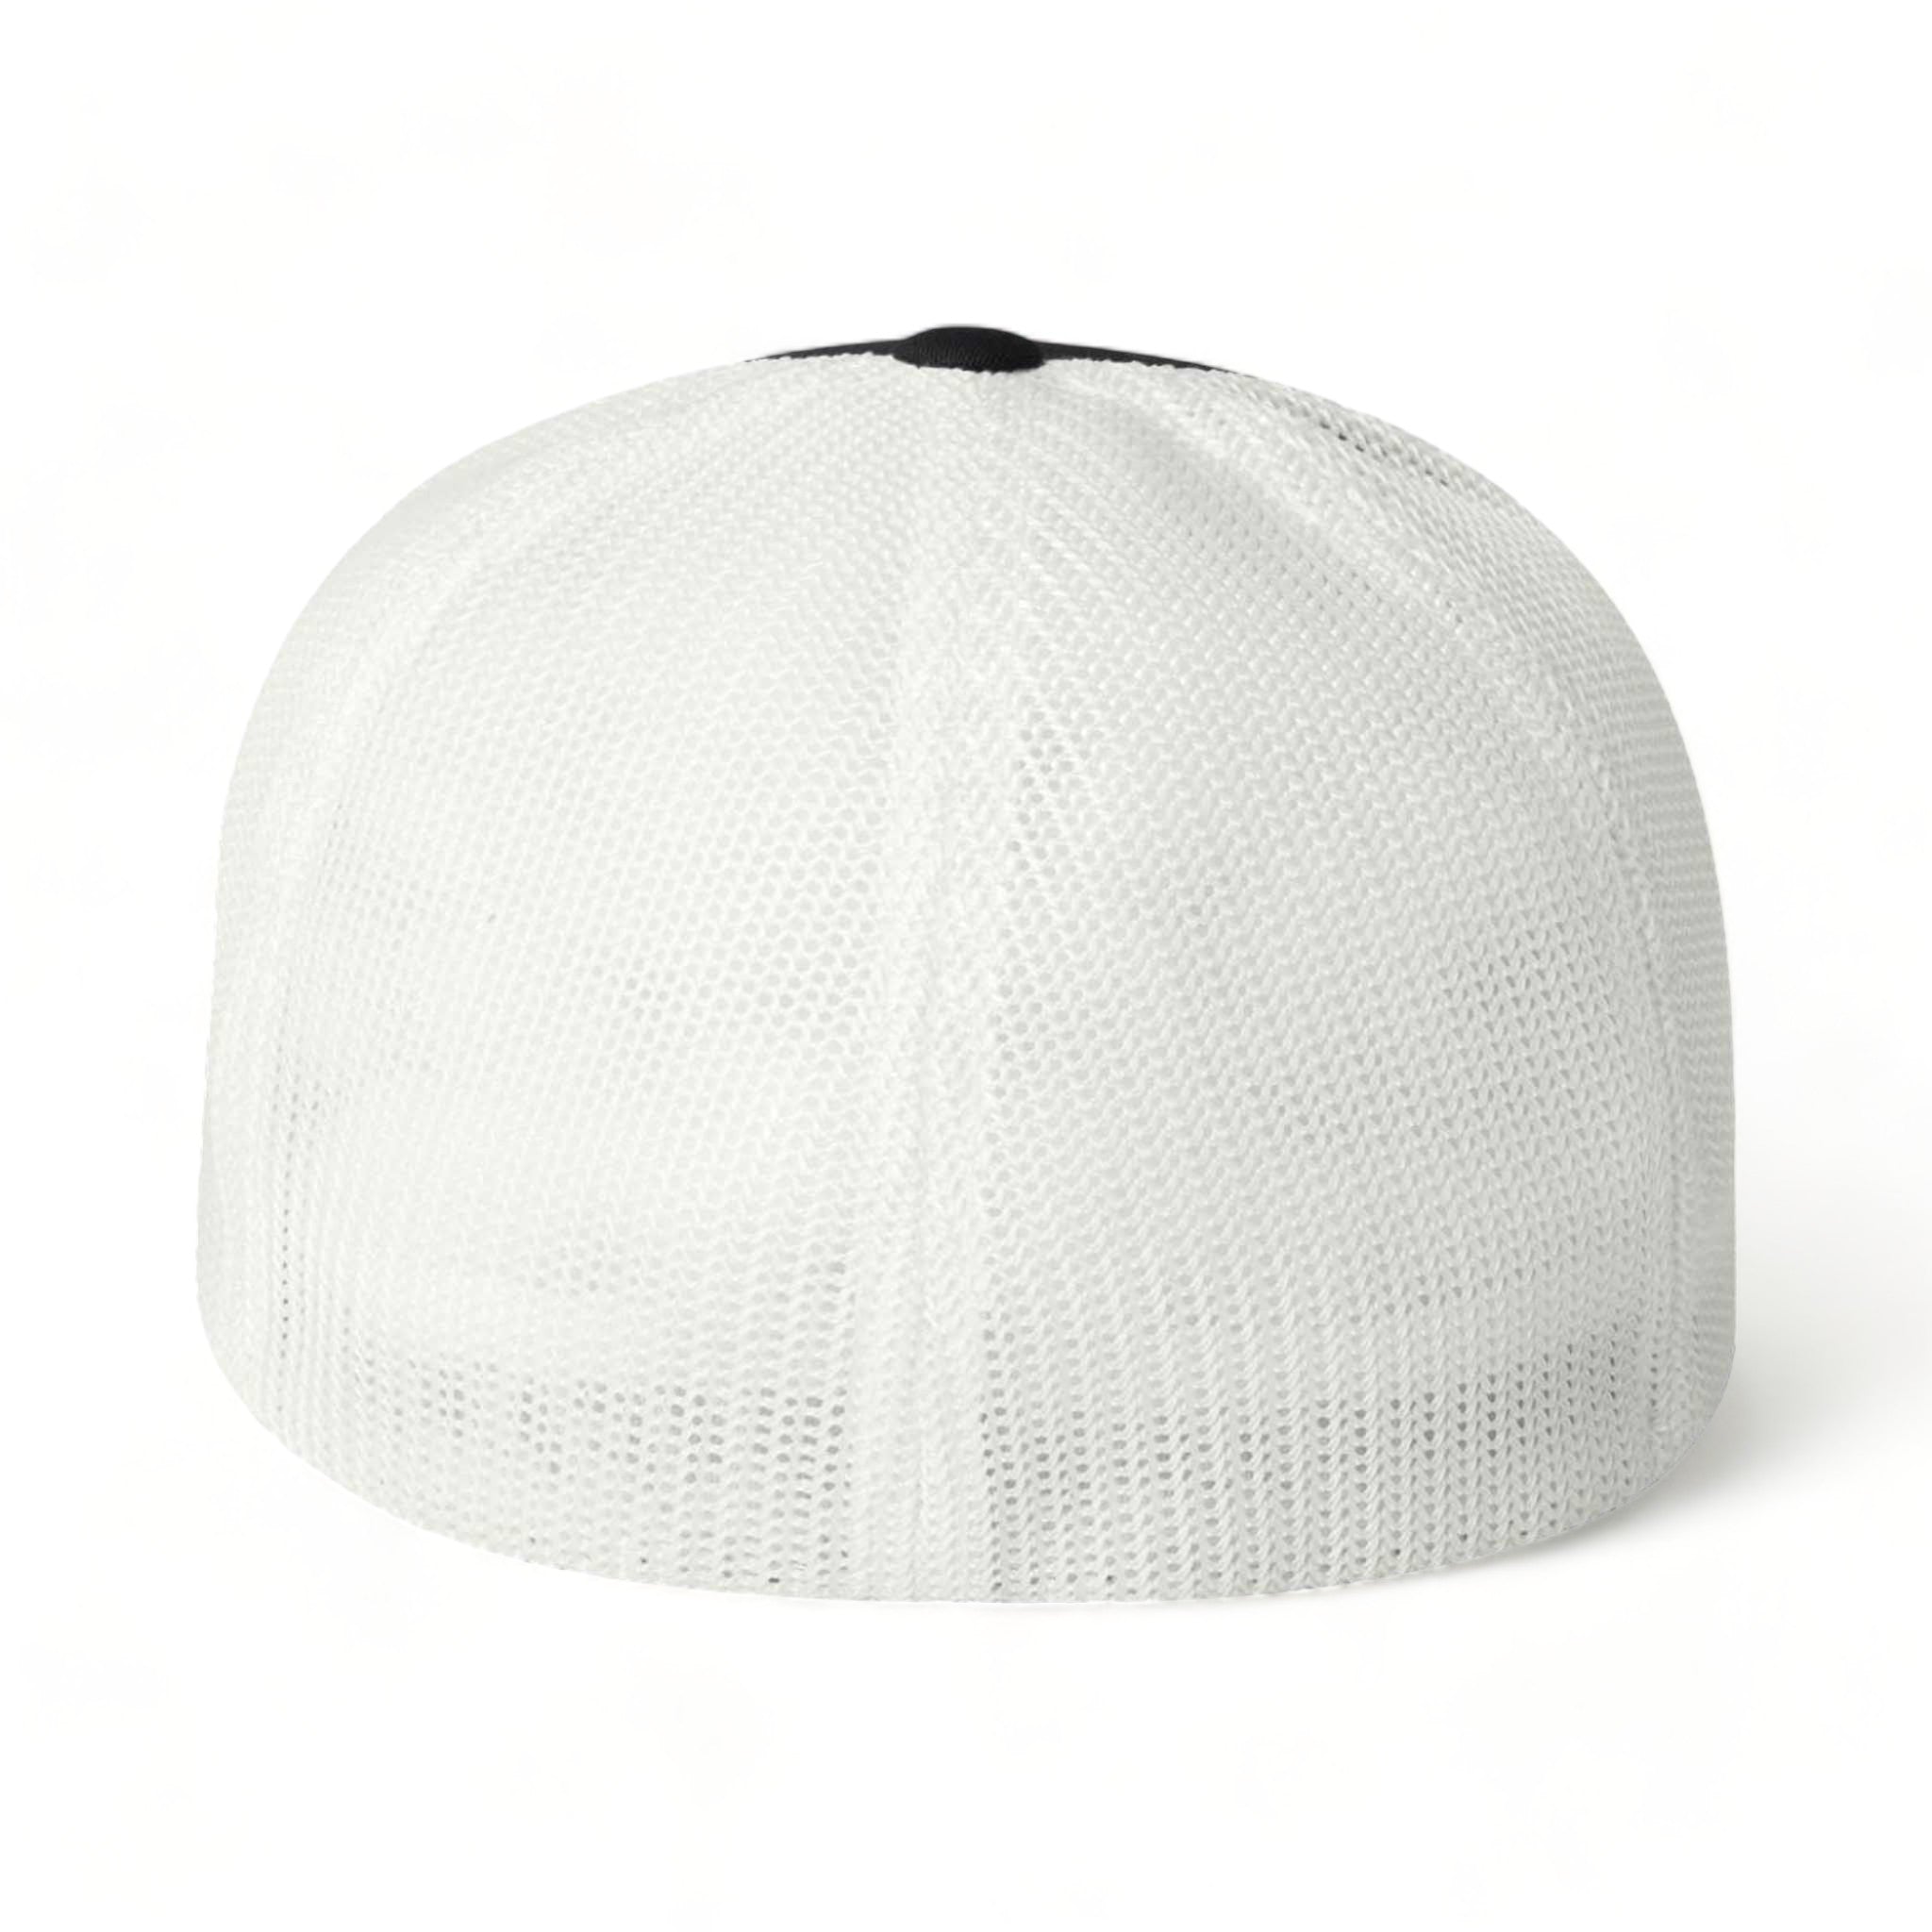 Back view of Flexfit 6511 custom hat in black and white